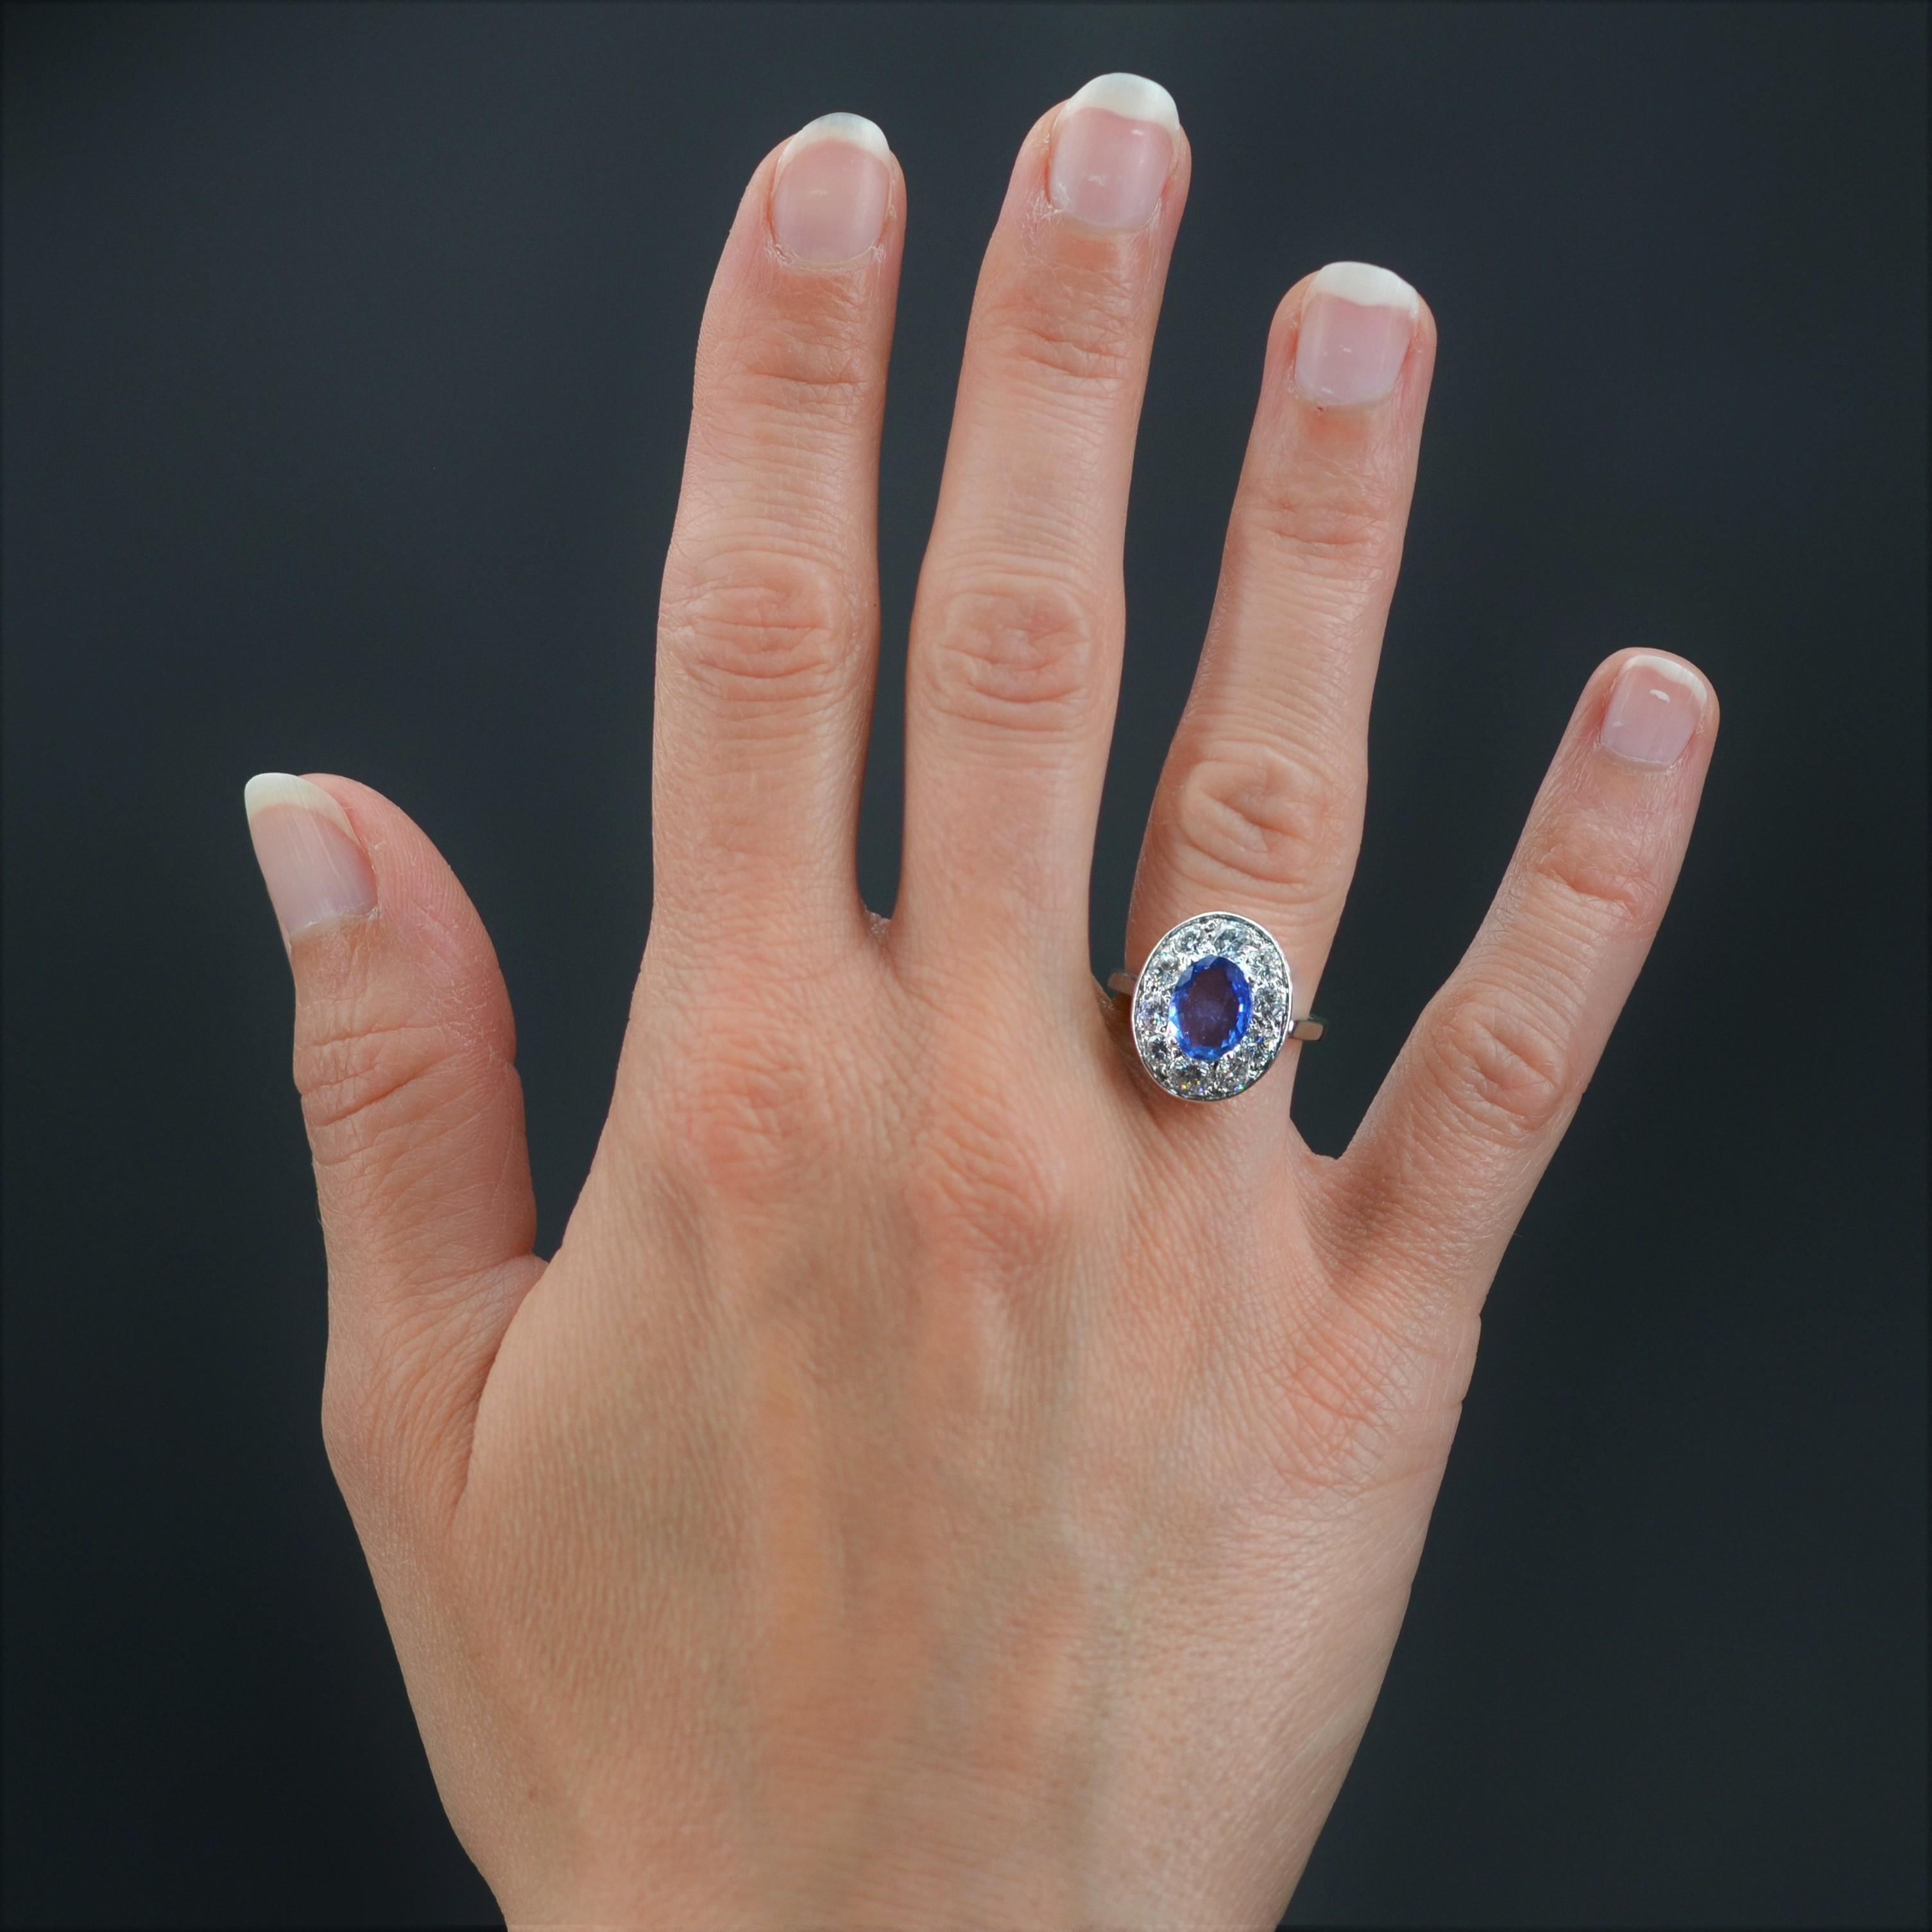 Ring in 18 karat white gold, eagle head hallmark and platinum, dog head hallmark.
Of oval shape, this splendid ring is decorated on its top of an oval sapphire retained with 4 claws, in a surrounding of modern brilliant- cut diamonds. The basket is